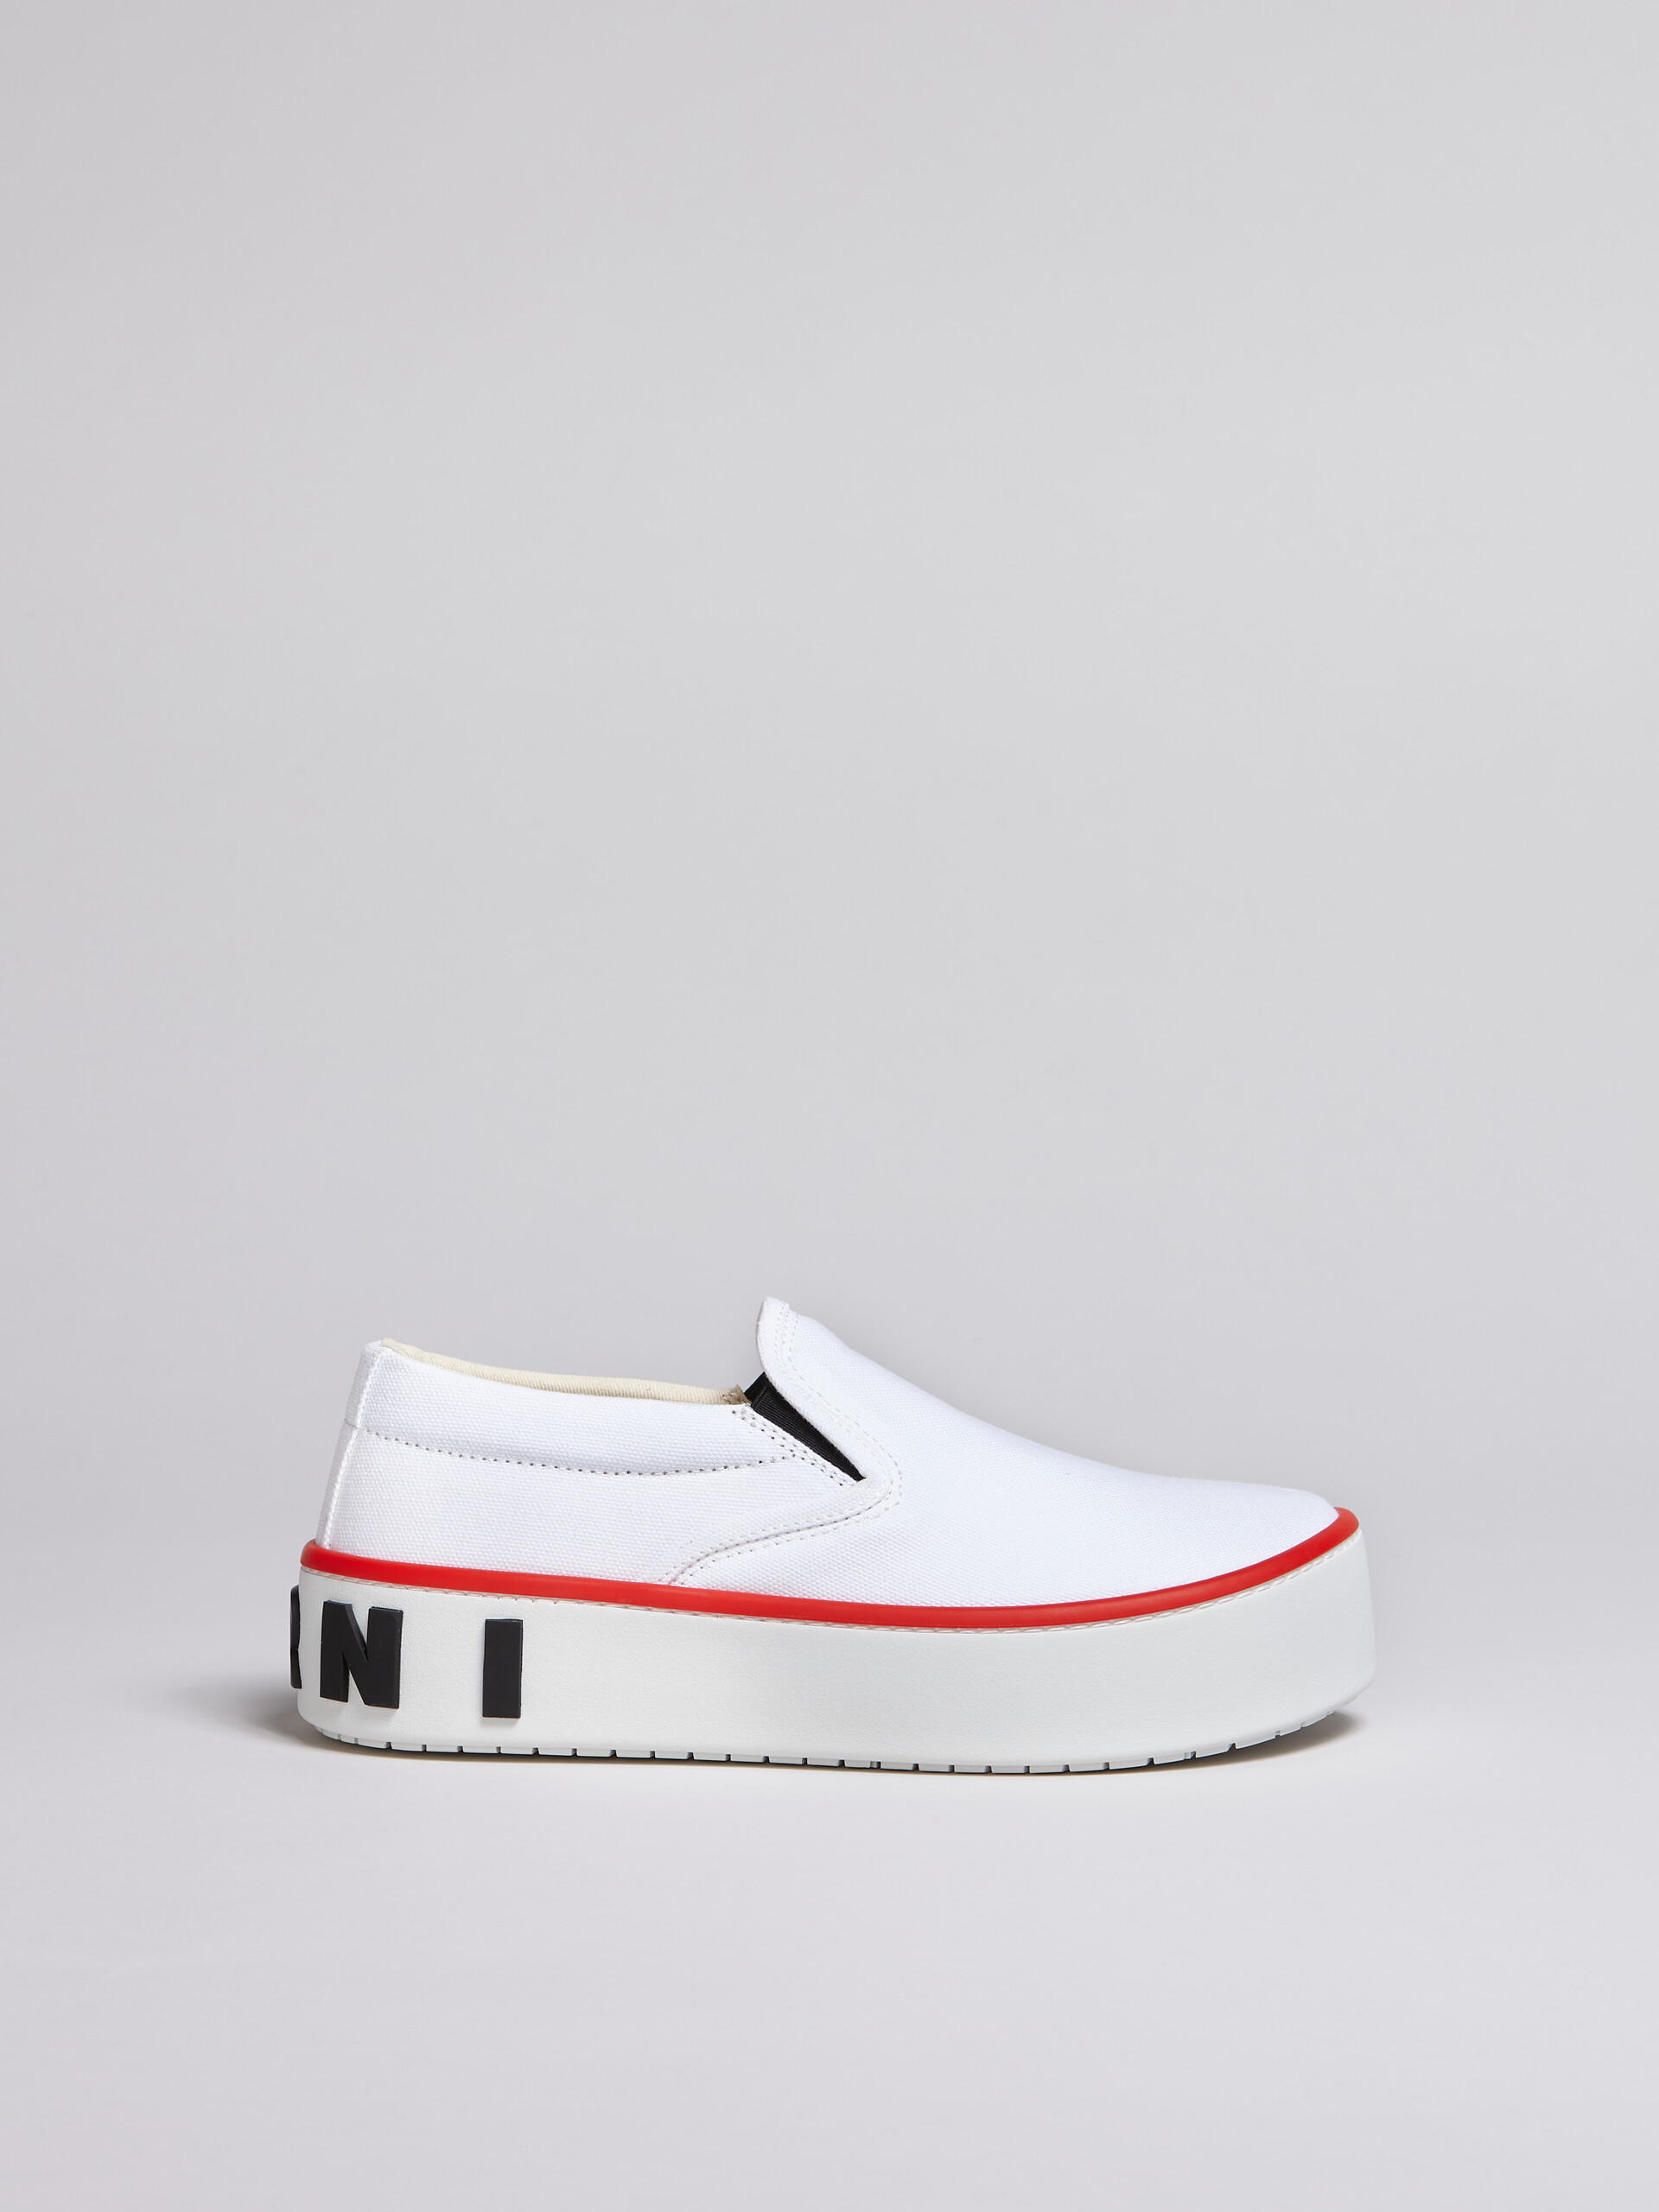 Sneaker PAW in canvas bianco con maxi logo - Sneakers - Image 1